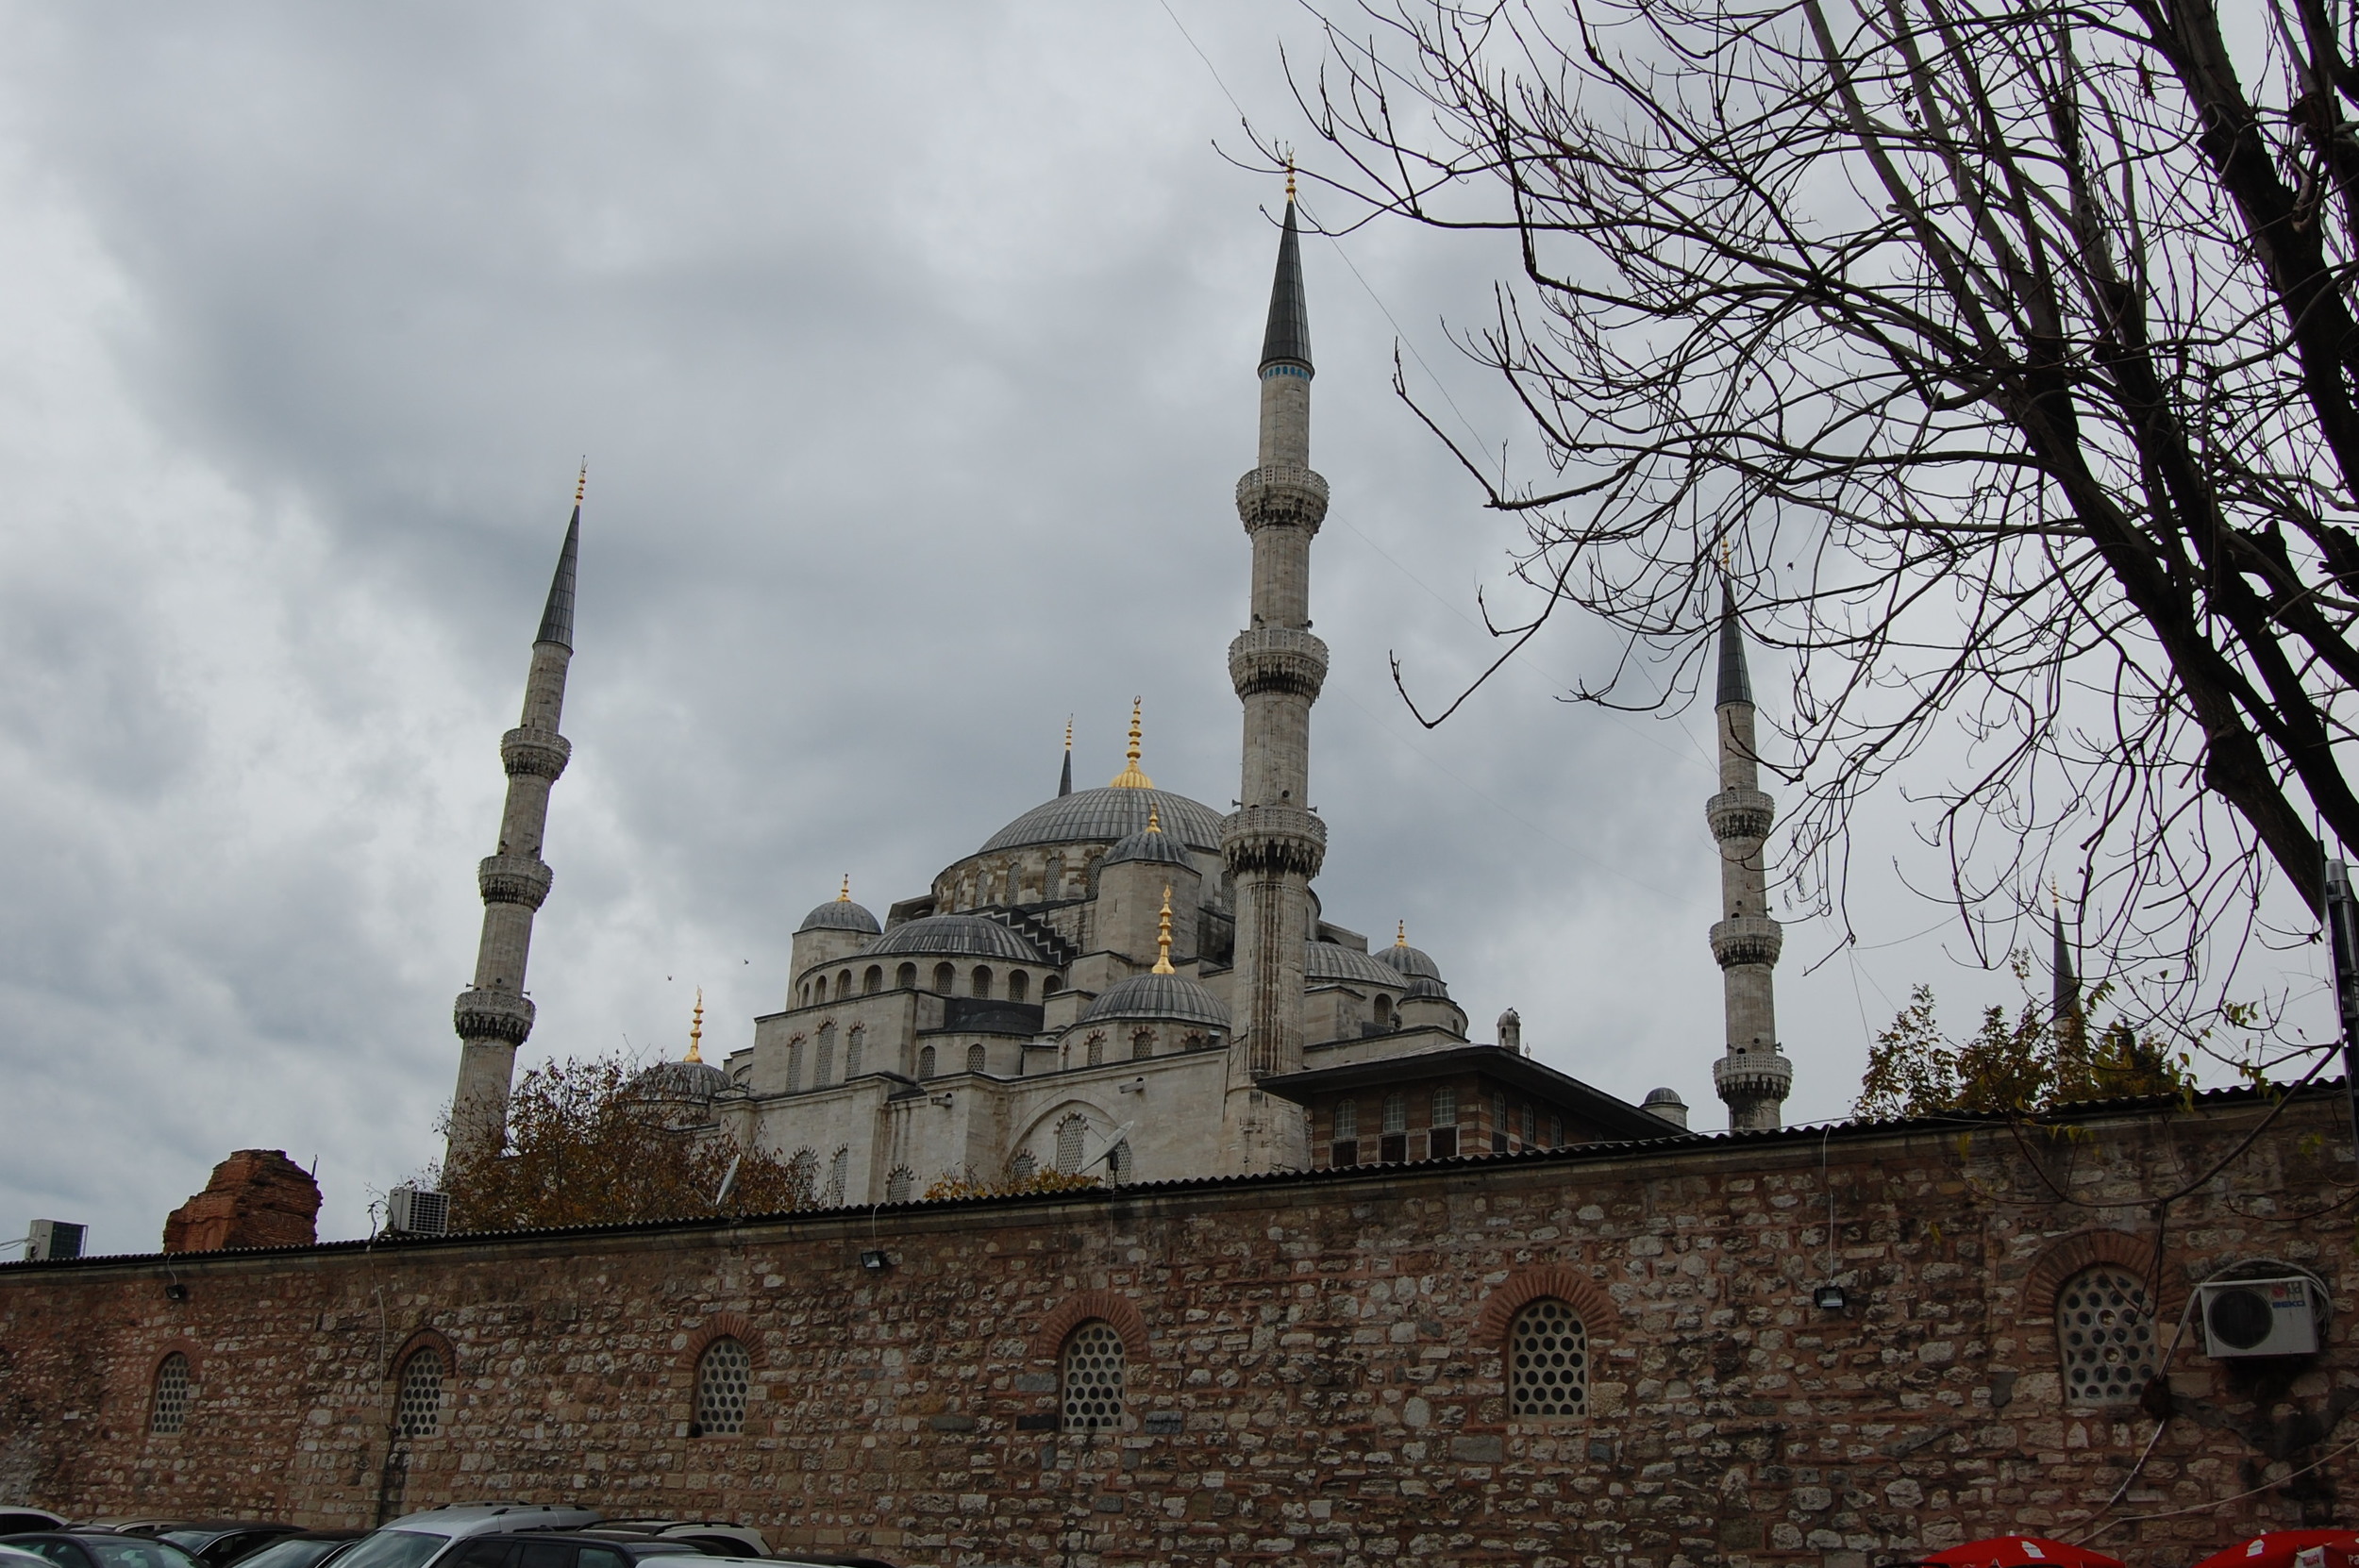 The Blue Mosque Complex